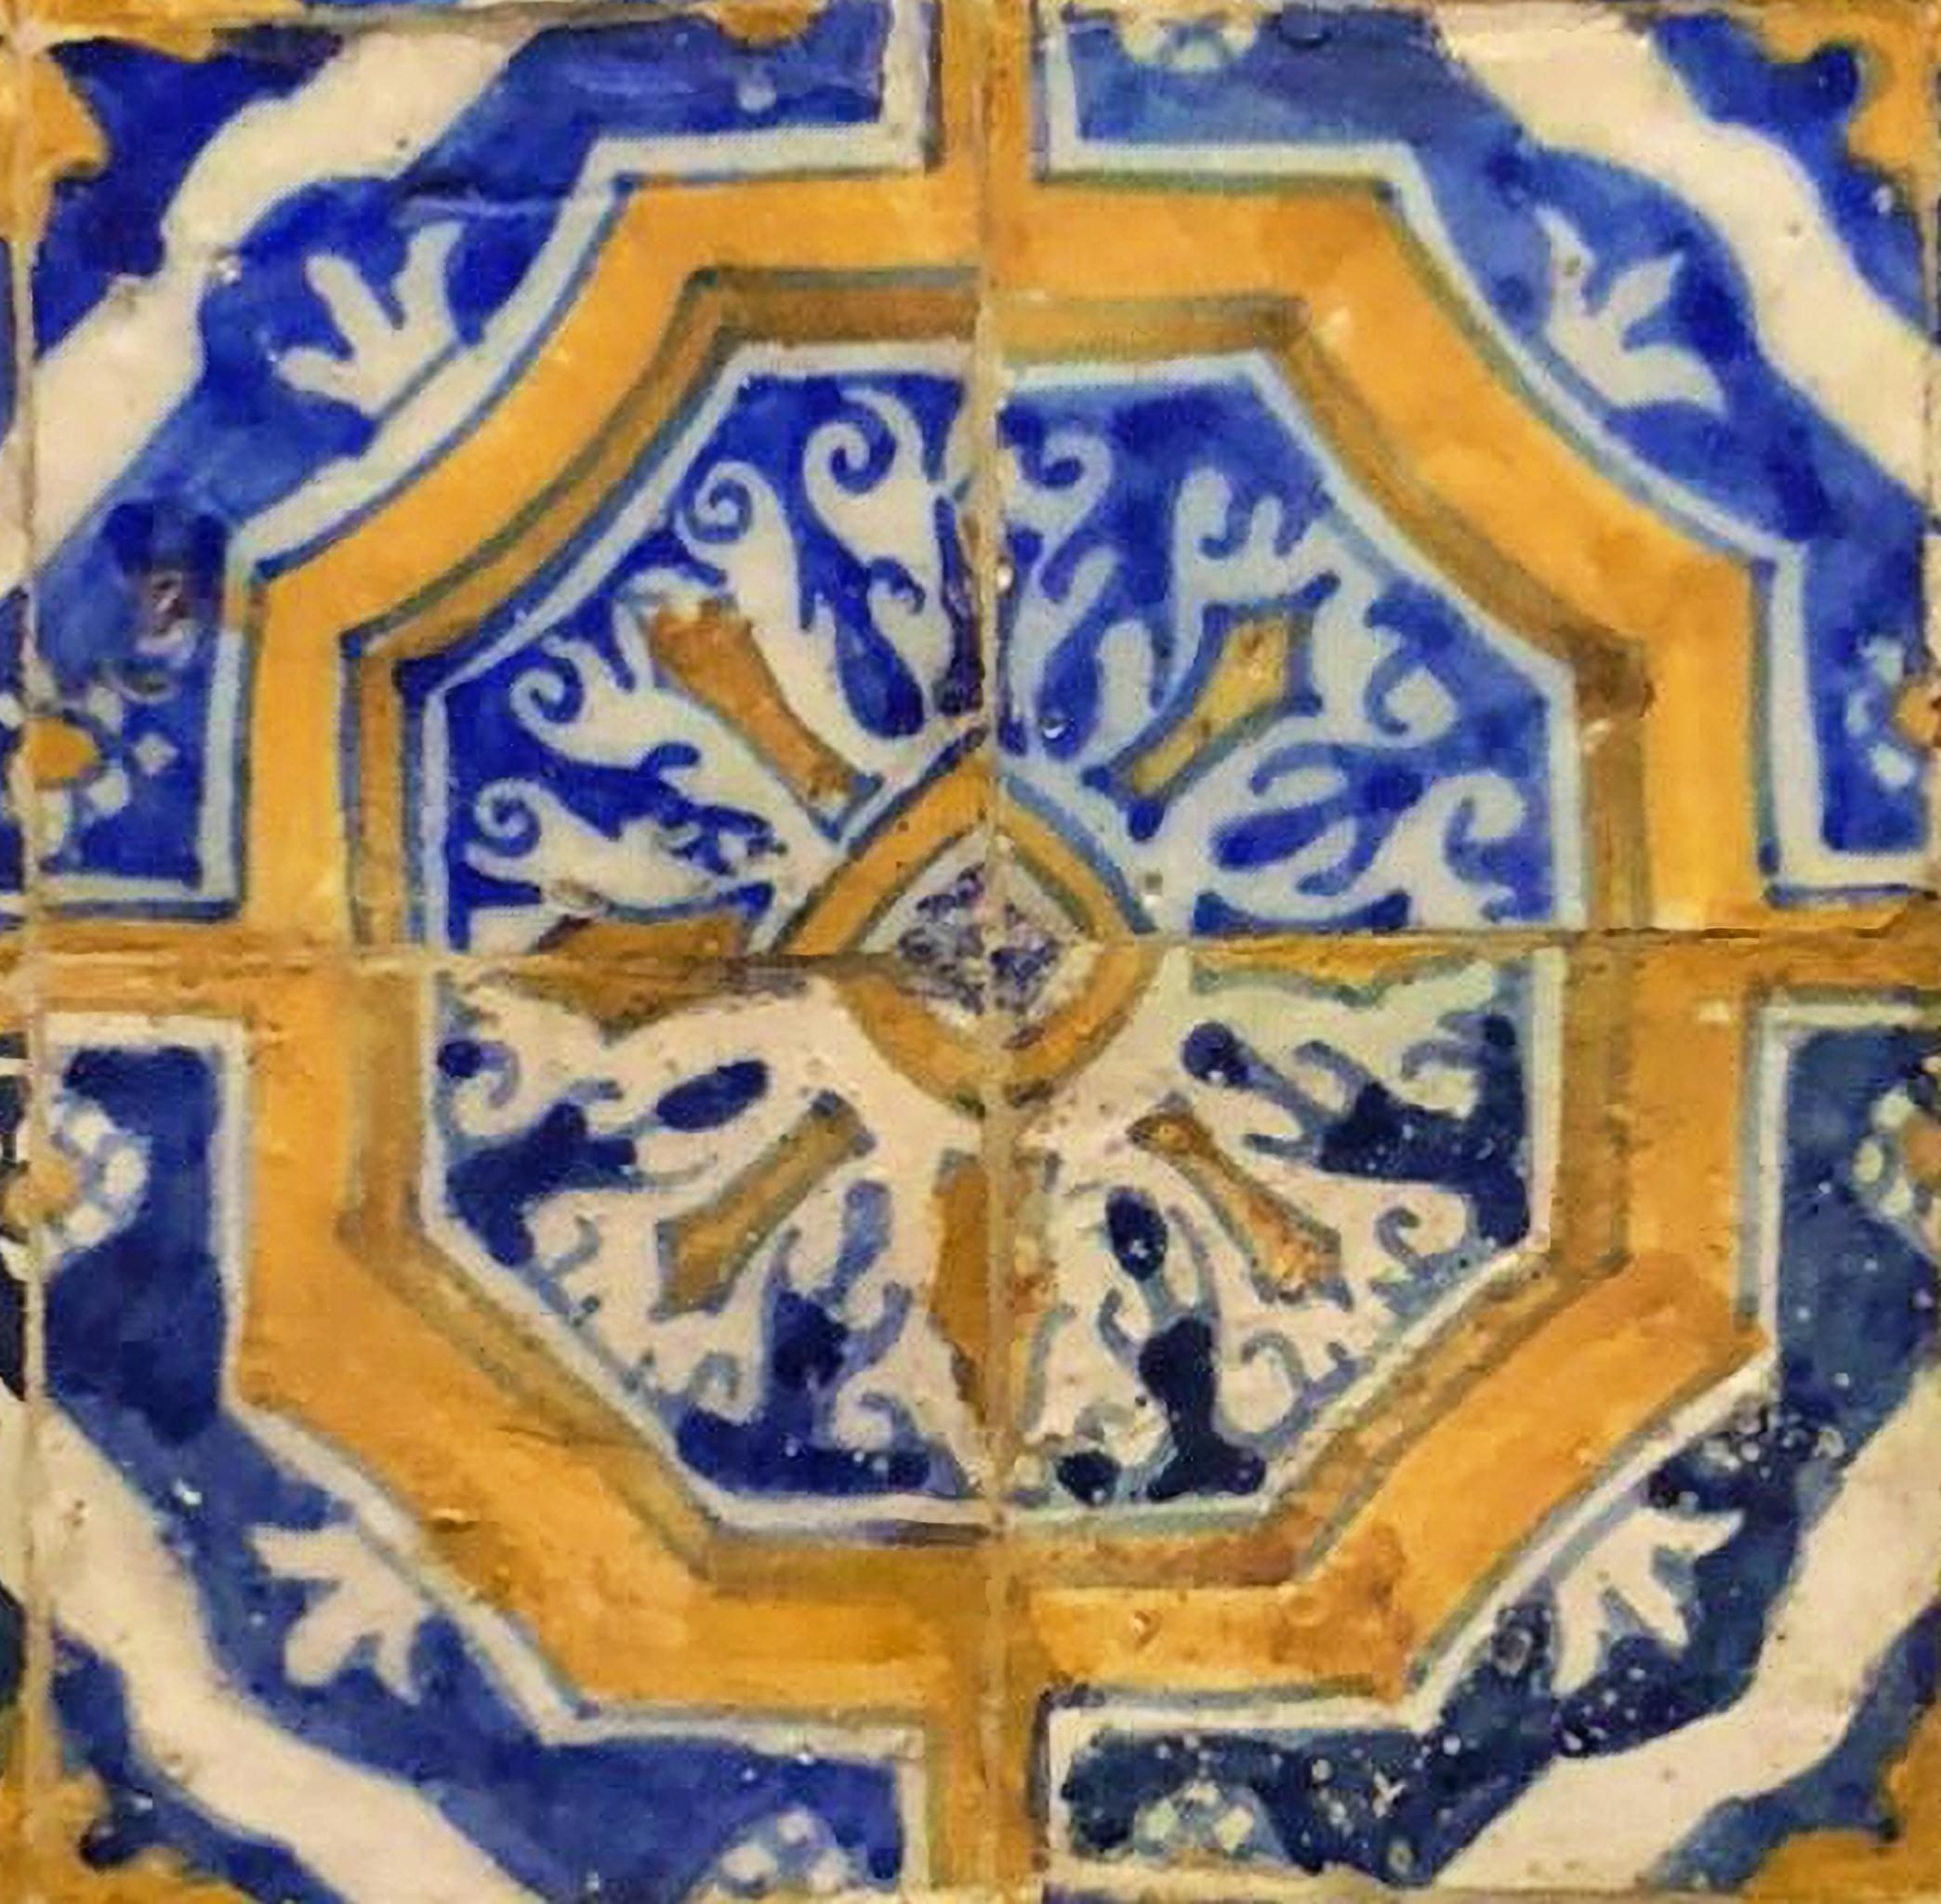 17th century Portuguese Tile Panel
Restored
Measures: 56cm x 56cm
14cm x 14cm tiles

With certificate of authenticity and export issued by the Directorate General of Portuguese Cultural Heritage, the only official department for issuing certificates